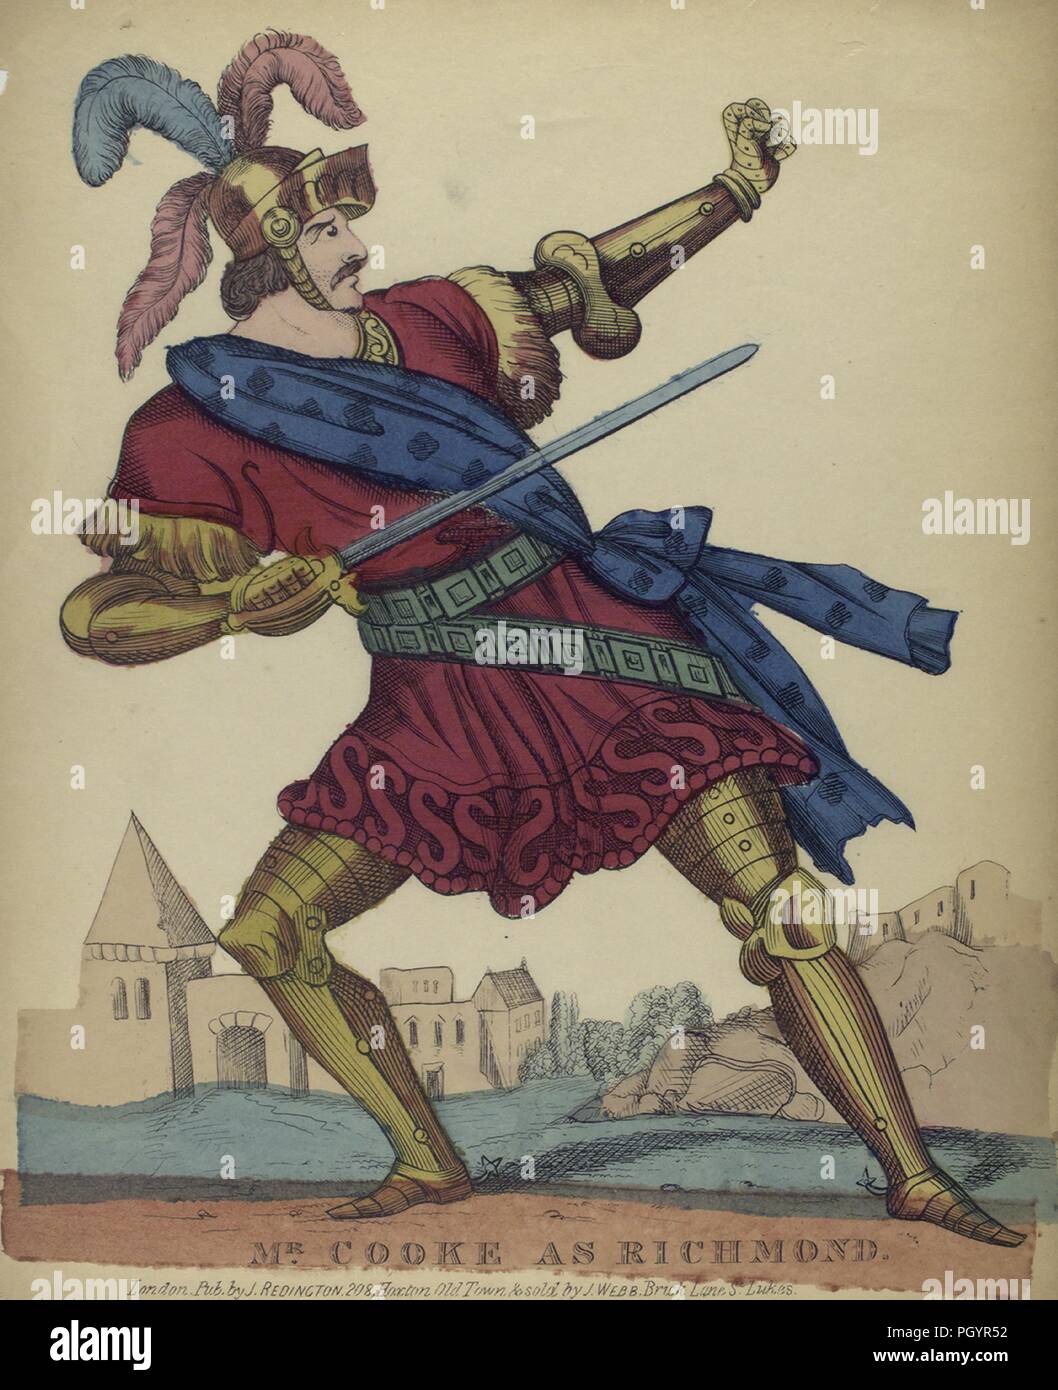 Hand-colored print, depicting a full-length view of British actor Mr Cooke, with a serious look on his face, holding a sword in one hand and forming a raised fist with the other hand, dressed in a gold helmet with red and blue feathers, golden armour, and a red skirted tunic with a blue sash, while performing the role of 'Richmond, ' published in London by J Redington, 1823. From the New York Public Library. () Stock Photo